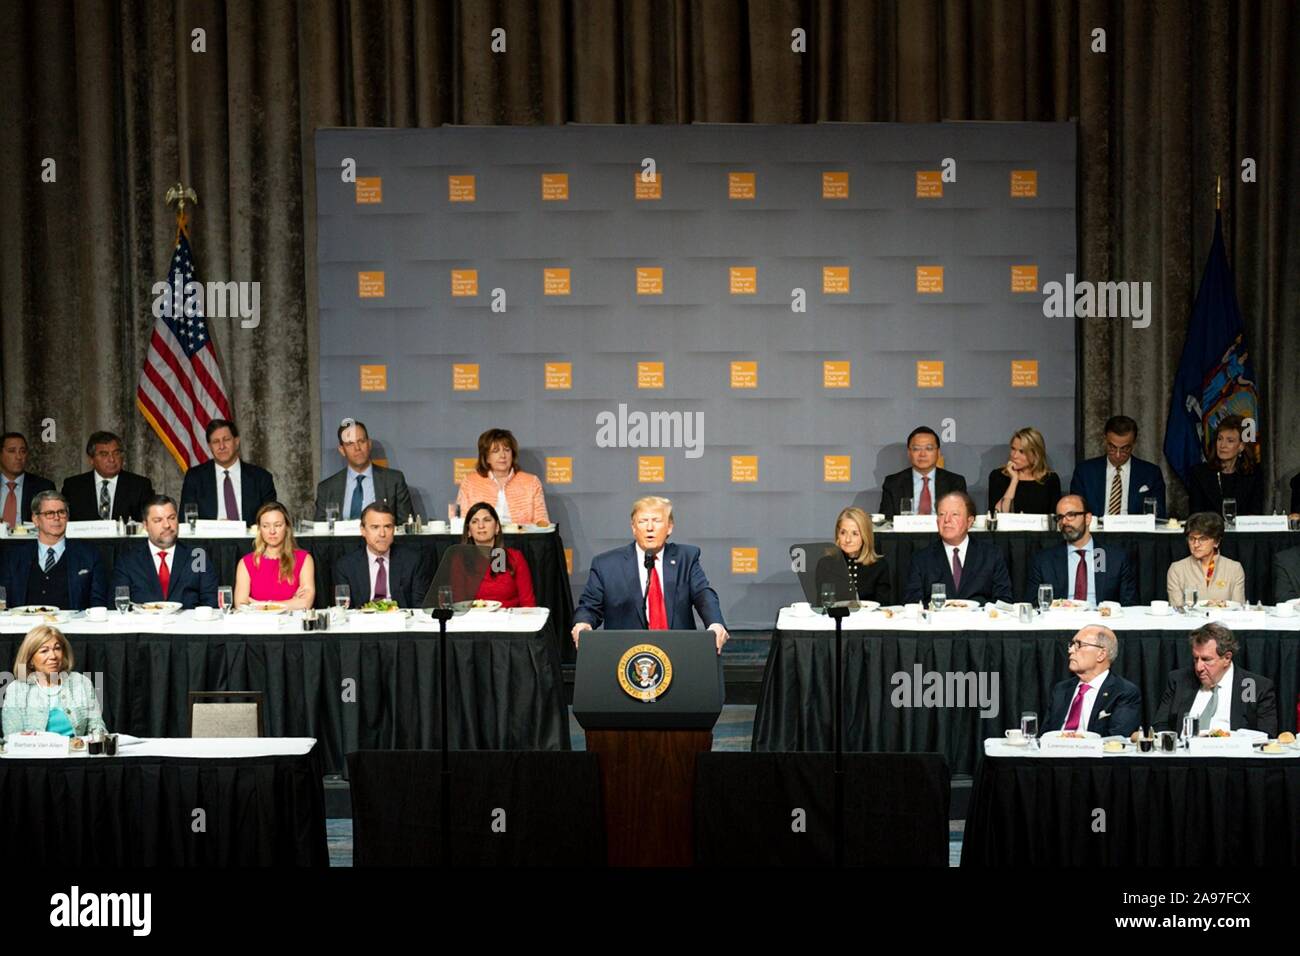 New York, United States of America. 12 November, 2019. U.S President Donald Trump delivers remarks to the Economic Club of New York at the New York Hilton Midtown November 12, 2019 in New York City, New York.  Credit: Shealah Craighead/White House Photo/Alamy Live News Stock Photo